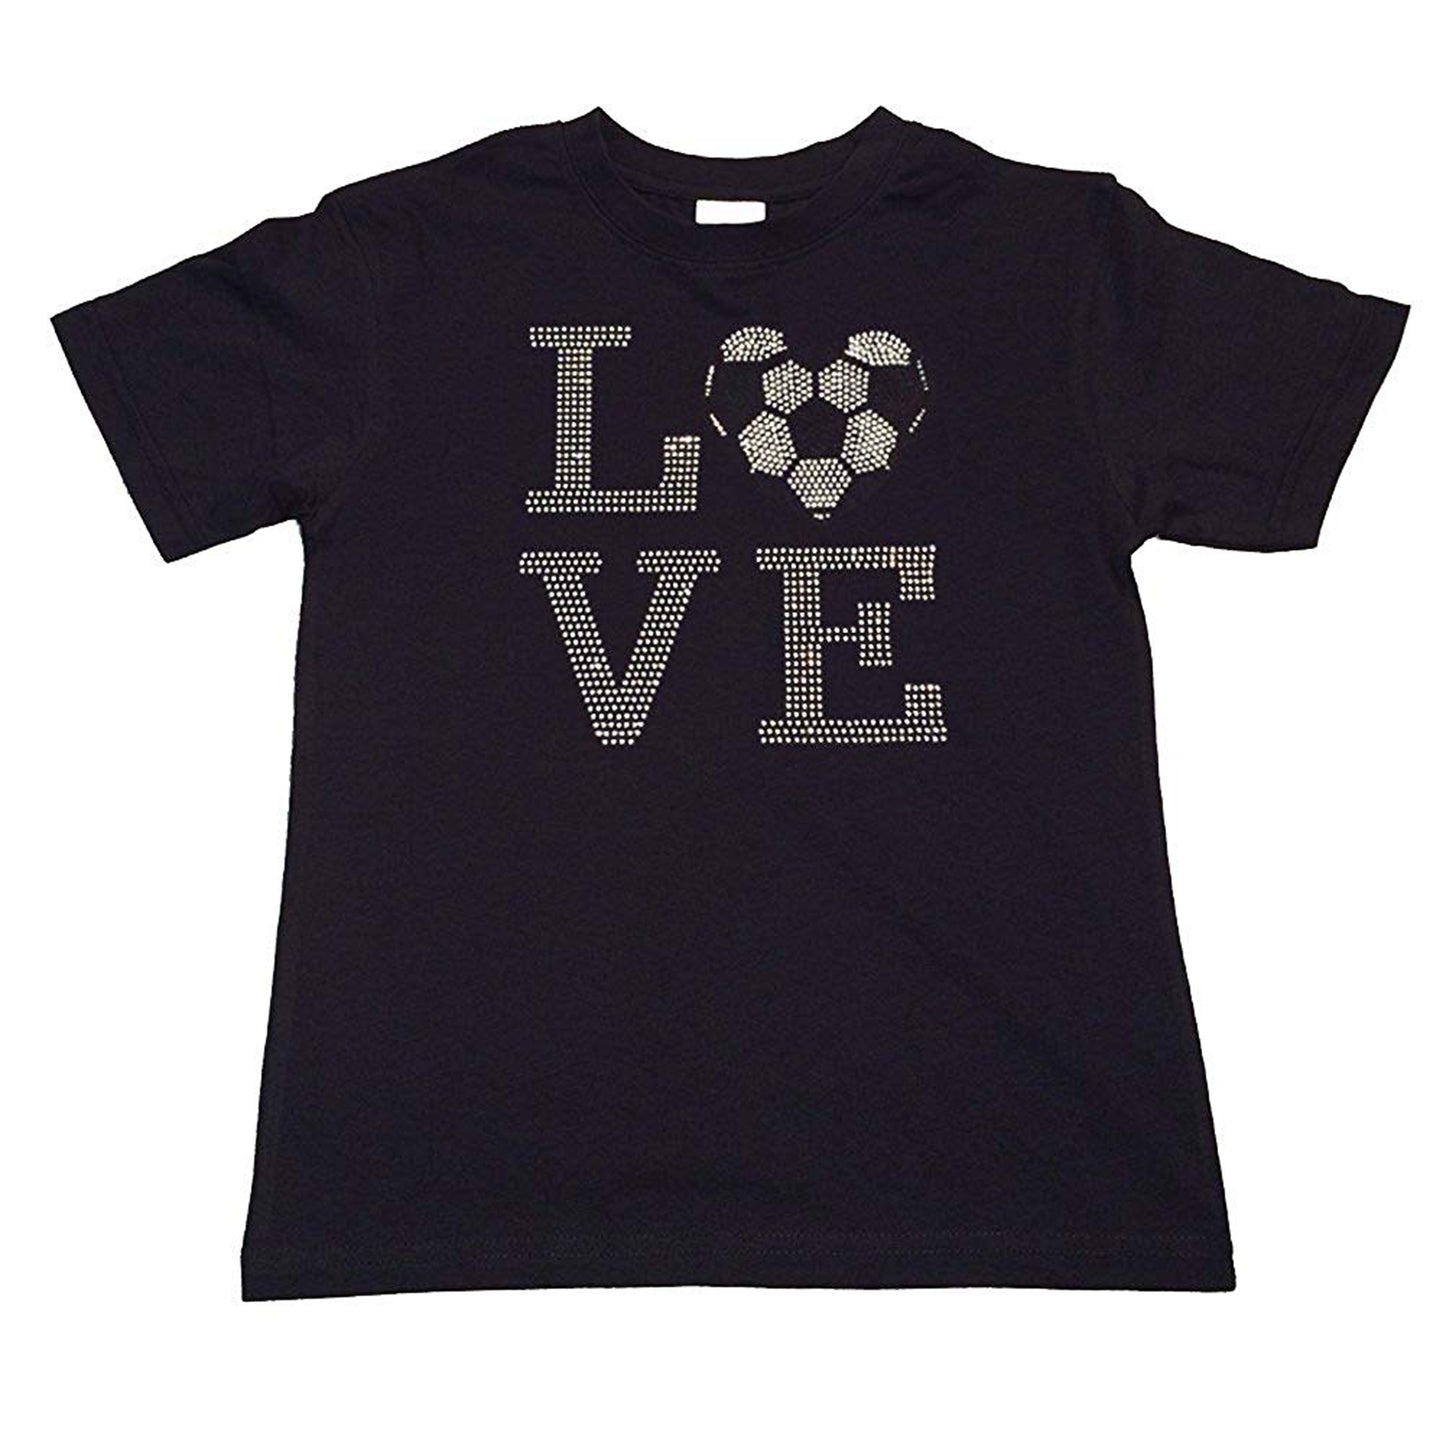 Girls Rhinestone T-Shirt " Love Soccer Heart " Size 3 to 14 Available